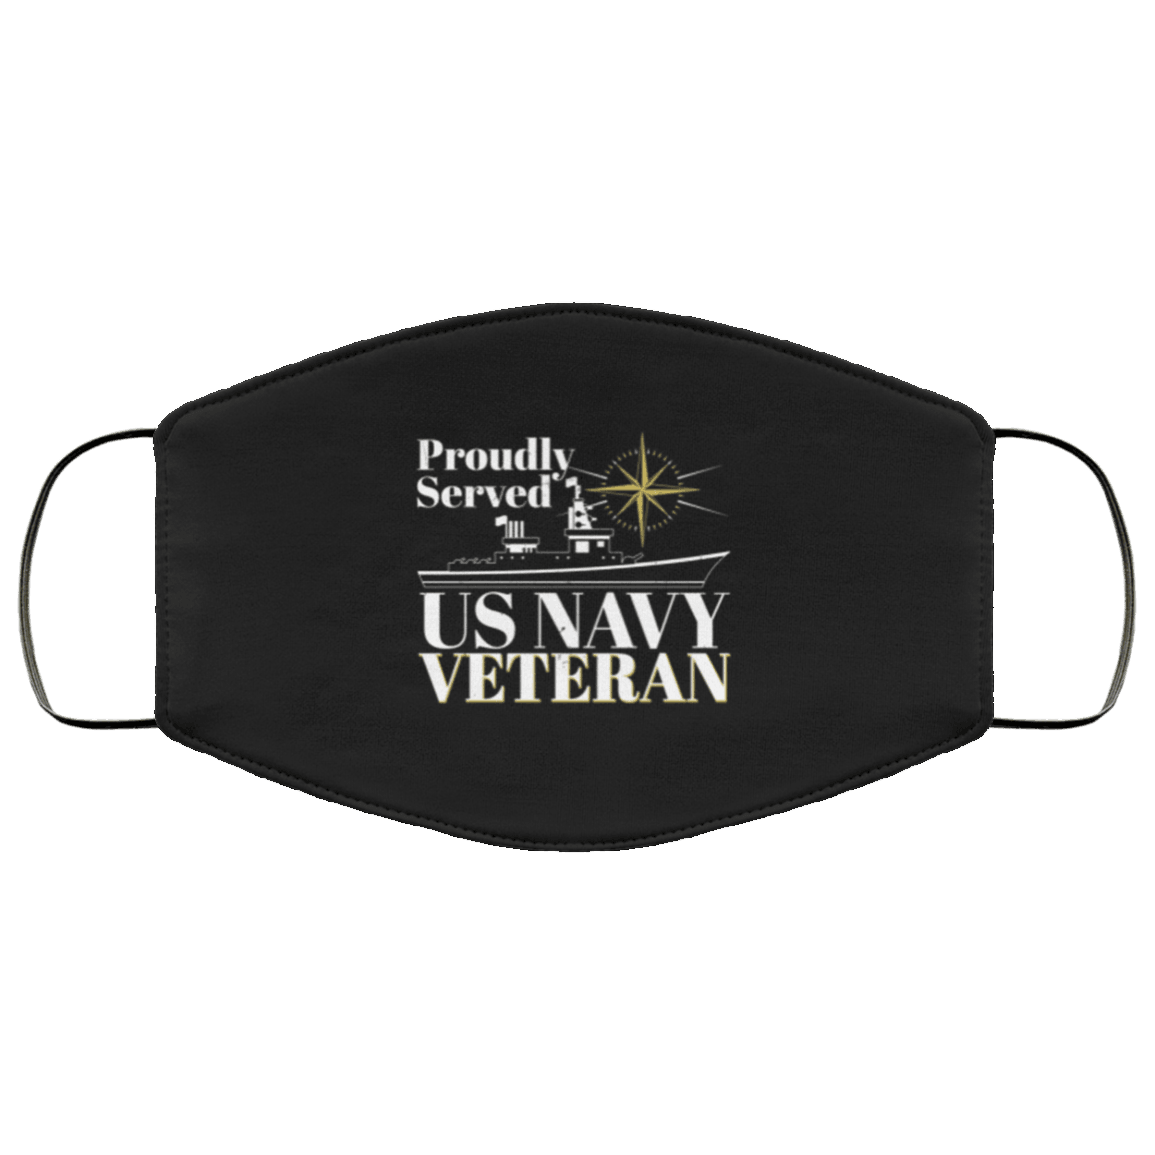 Designs by MyUtopia Shout Out:Proudly Served US Navy Veteran Adult Fabric Face Mask with Elastic Ear Loops,Fabric Face Mask / Black / Adult,Fabric Face Mask